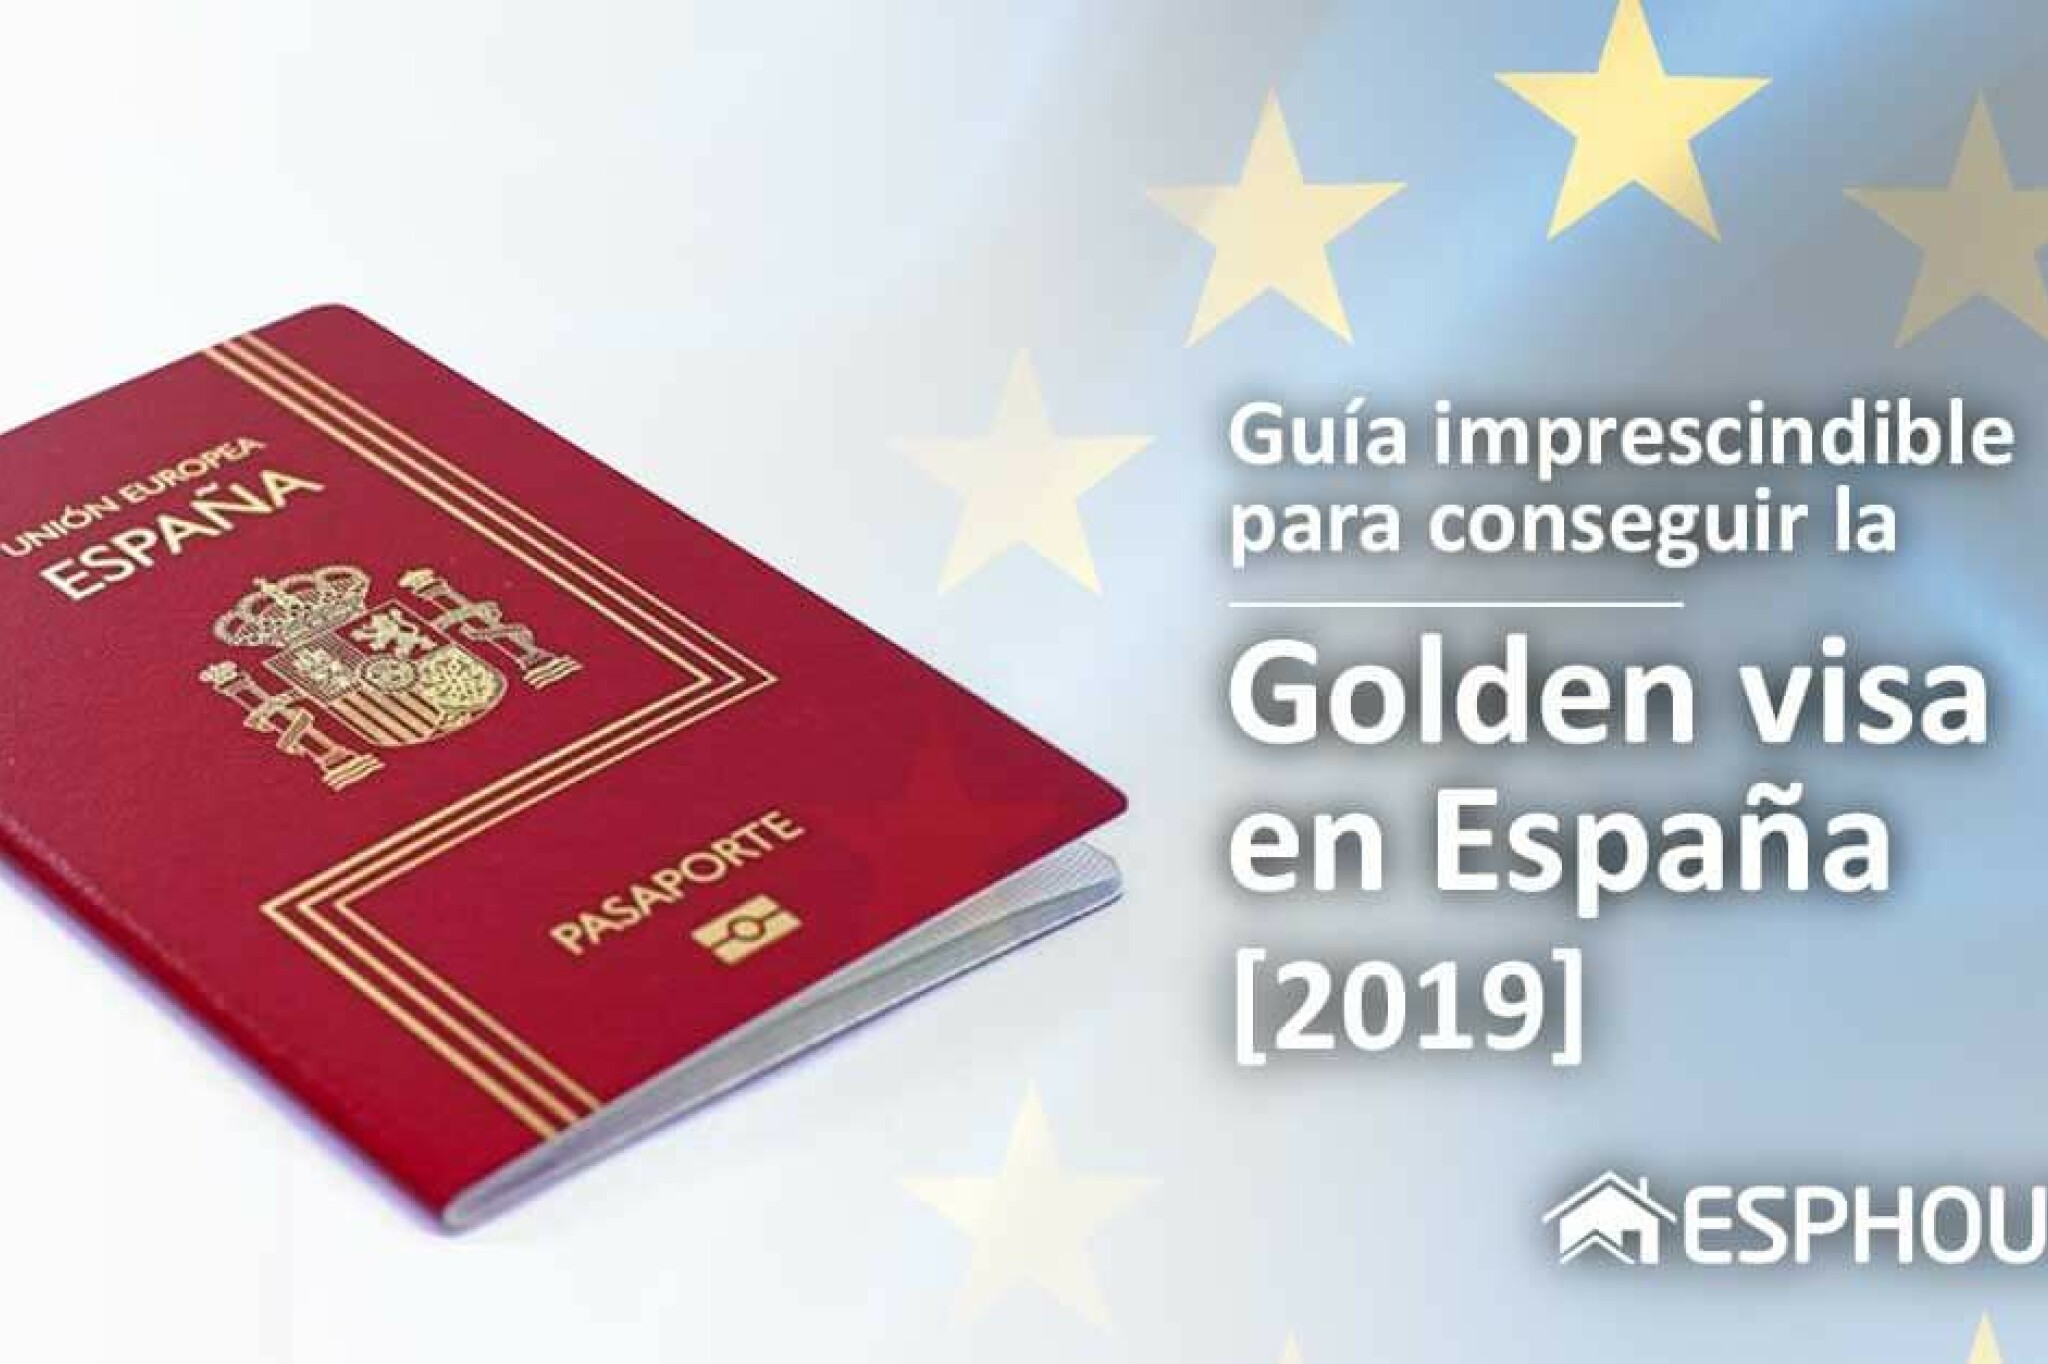 A MUST-HAVE guide to get a Golden Visa in Spain [2019].